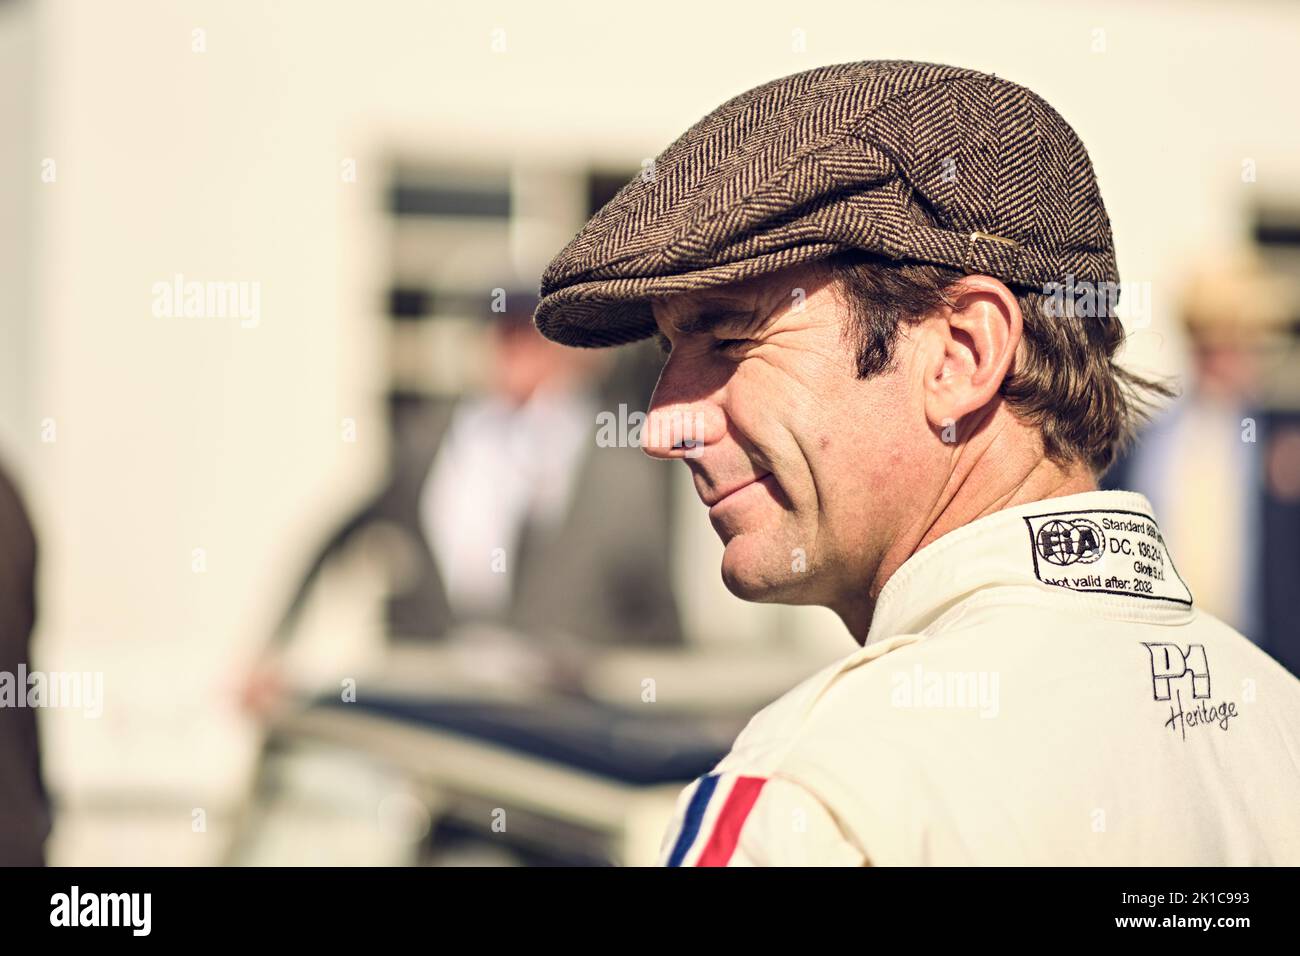 Goodwood, Chichester, UK. 17th Sept, 2022. 24 Hours of Le Mans winner Romain Dumas during the 2022 Goodwood Revival (Photo by Gergo Toth / Alamy Live News) Stock Photo